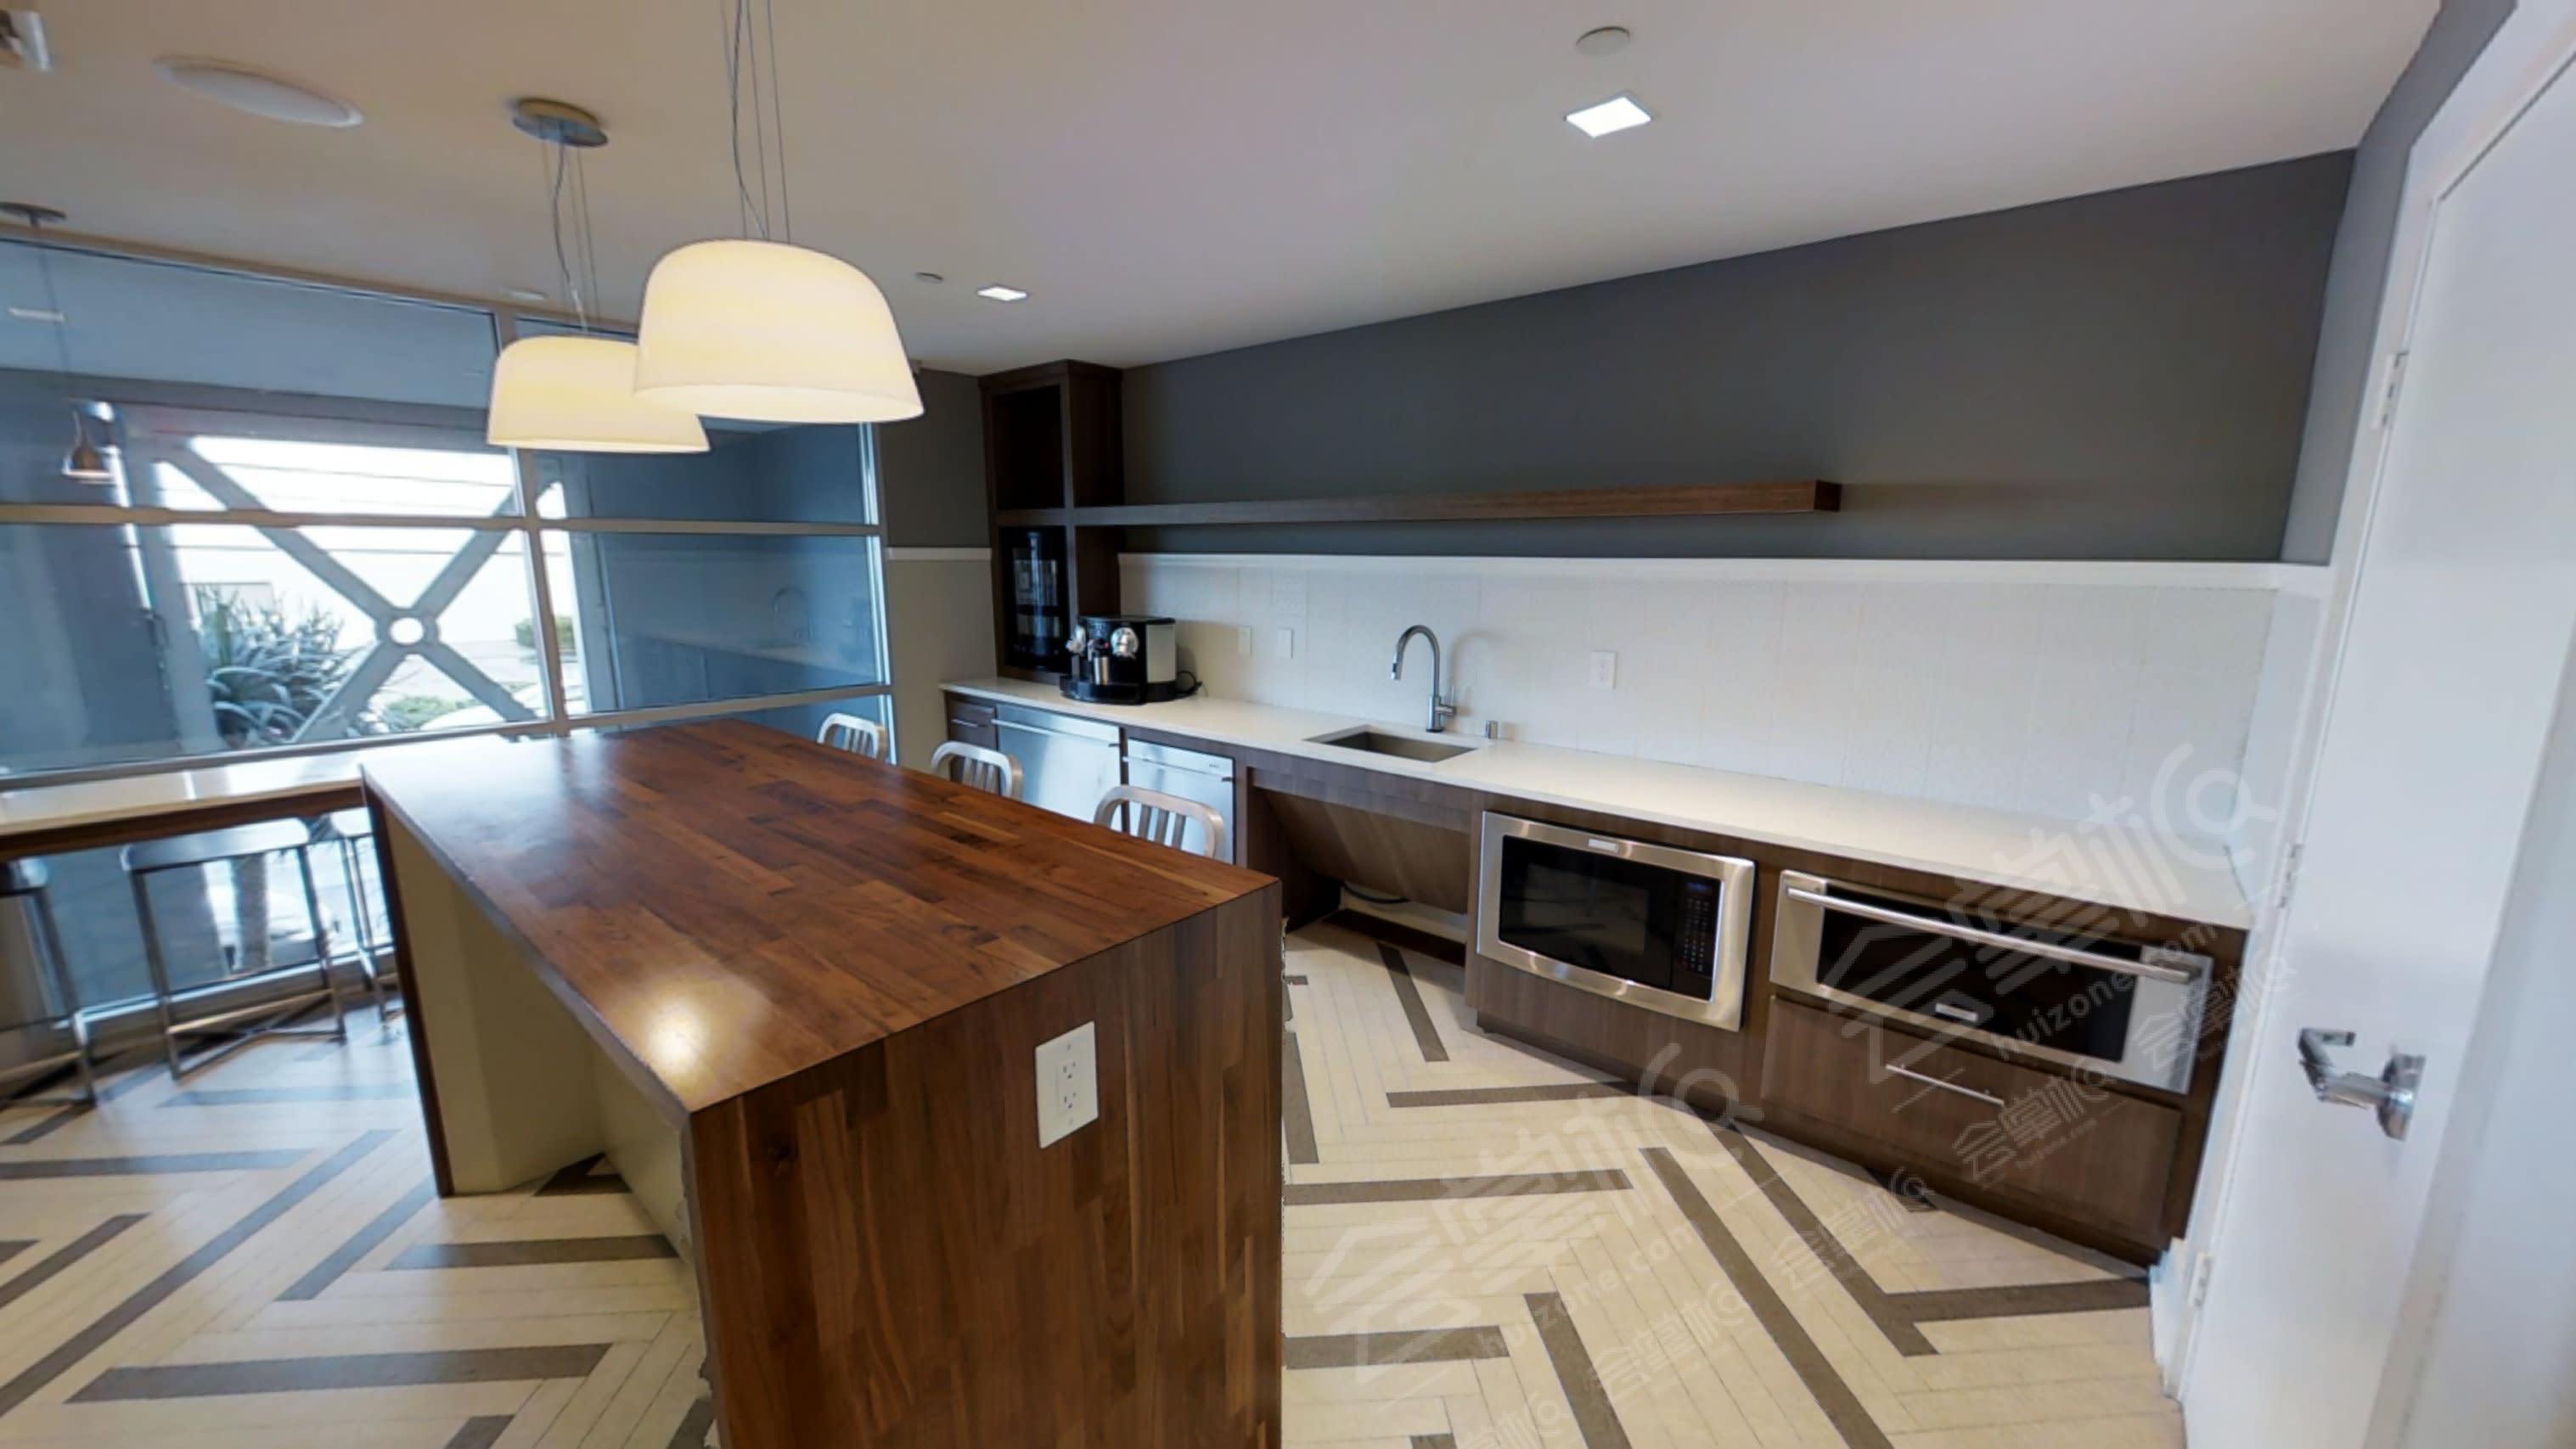 Sleek Lounge with Pool Table & Open Kitchenette, Great for Entertaining!